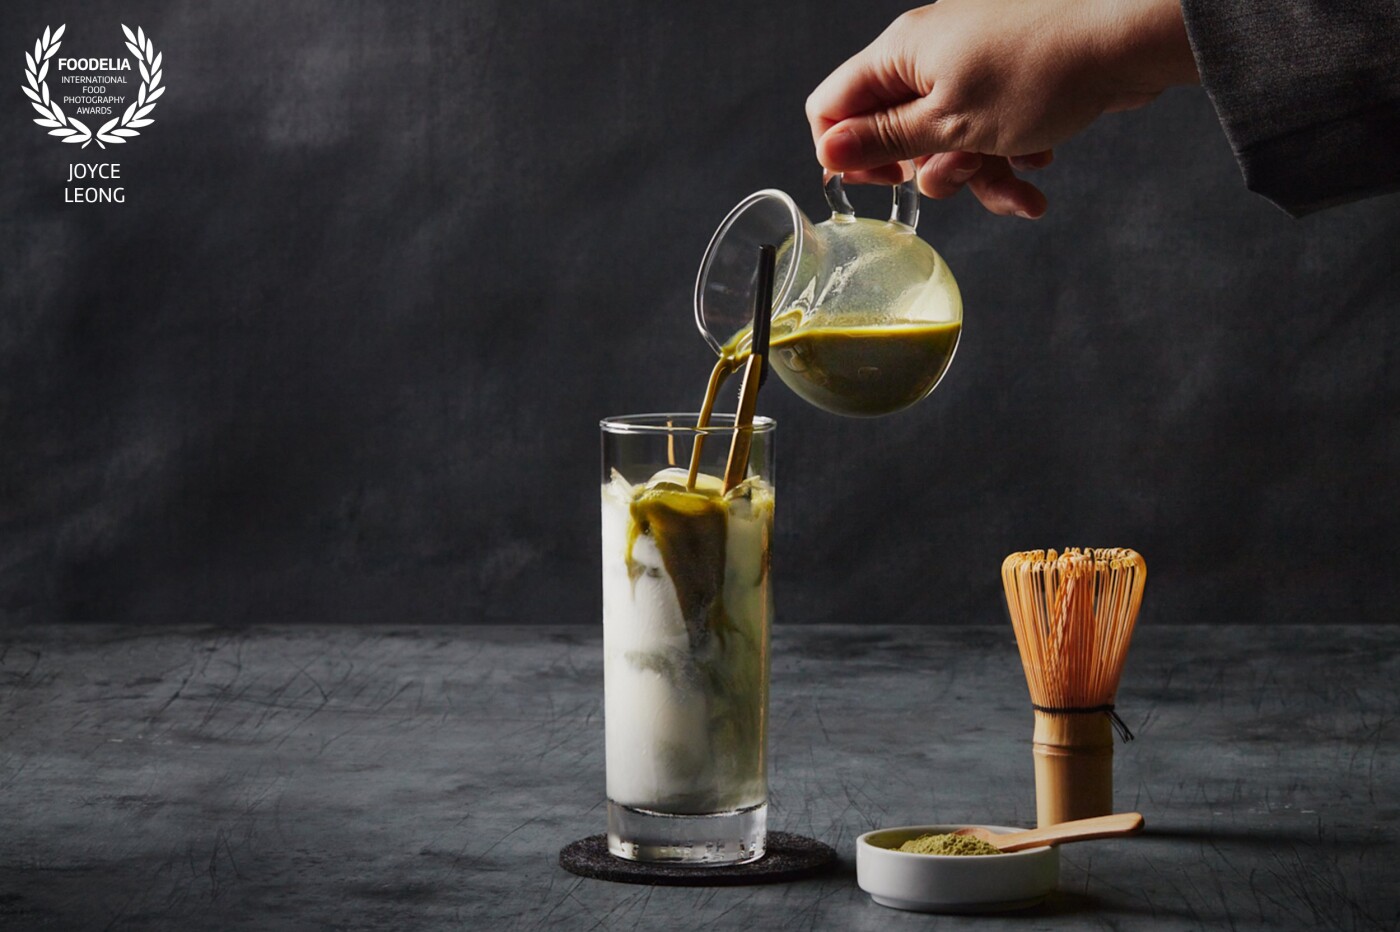 This was shot for a restaurant client who wanted a dark aesthetic and a pour shot was used to highlight the matcha as well as the swirls that appear when it mixes with the milk.